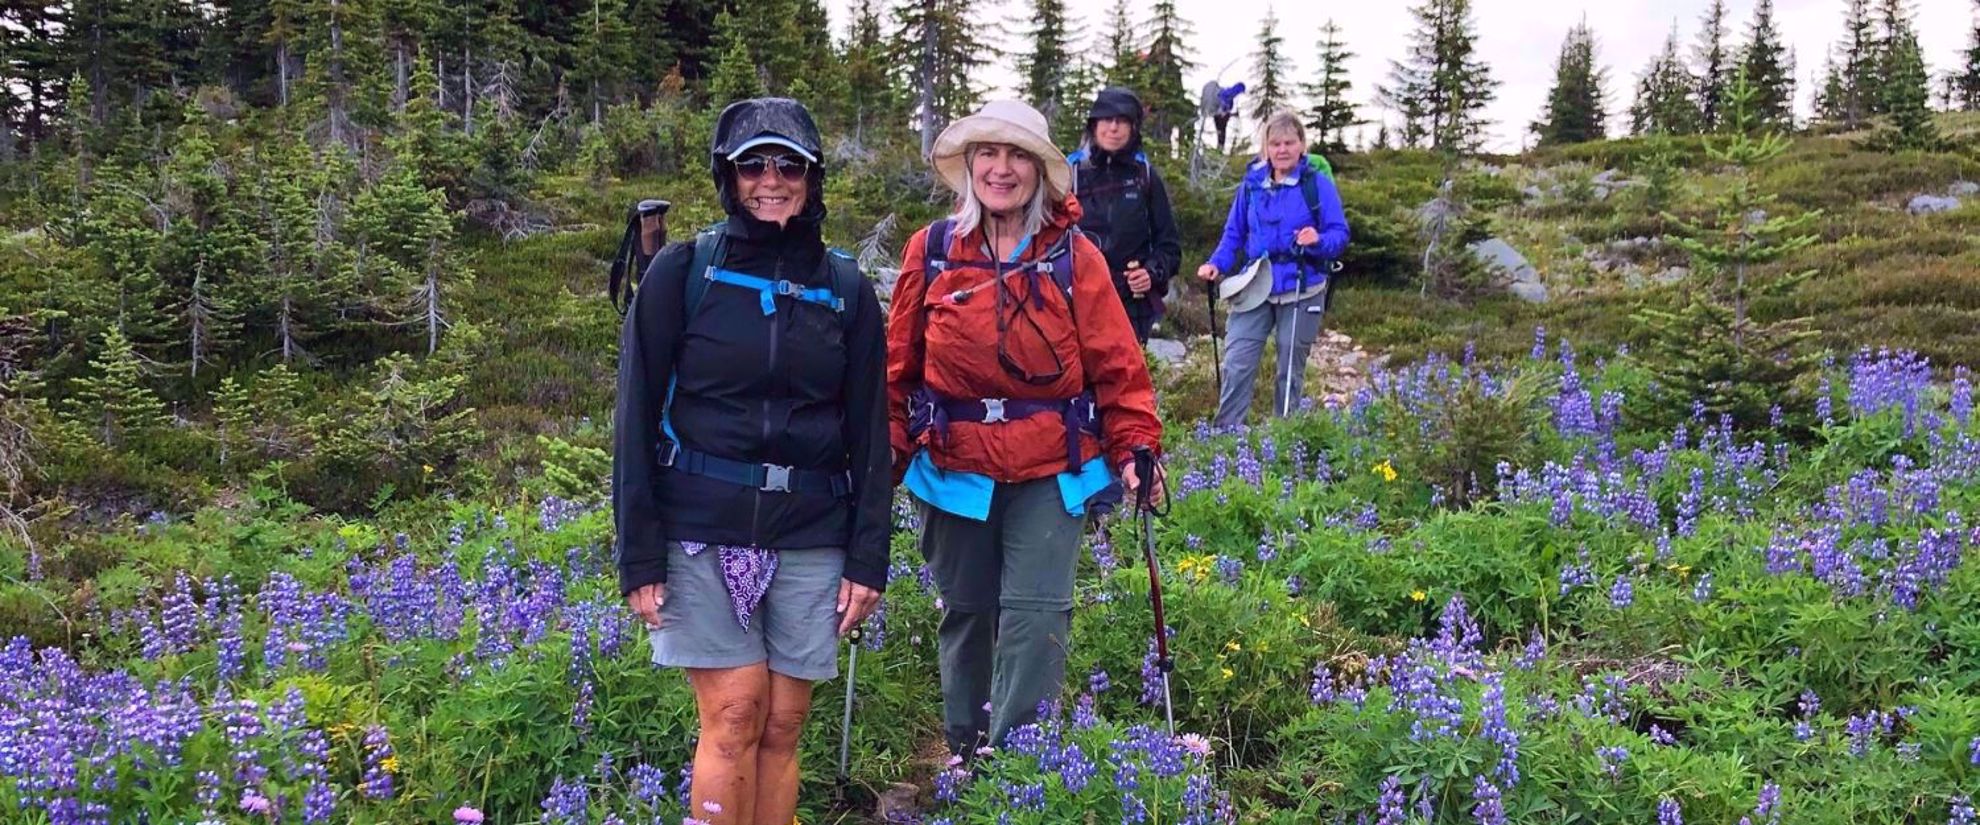 hiking through wildflowers in the wells gray